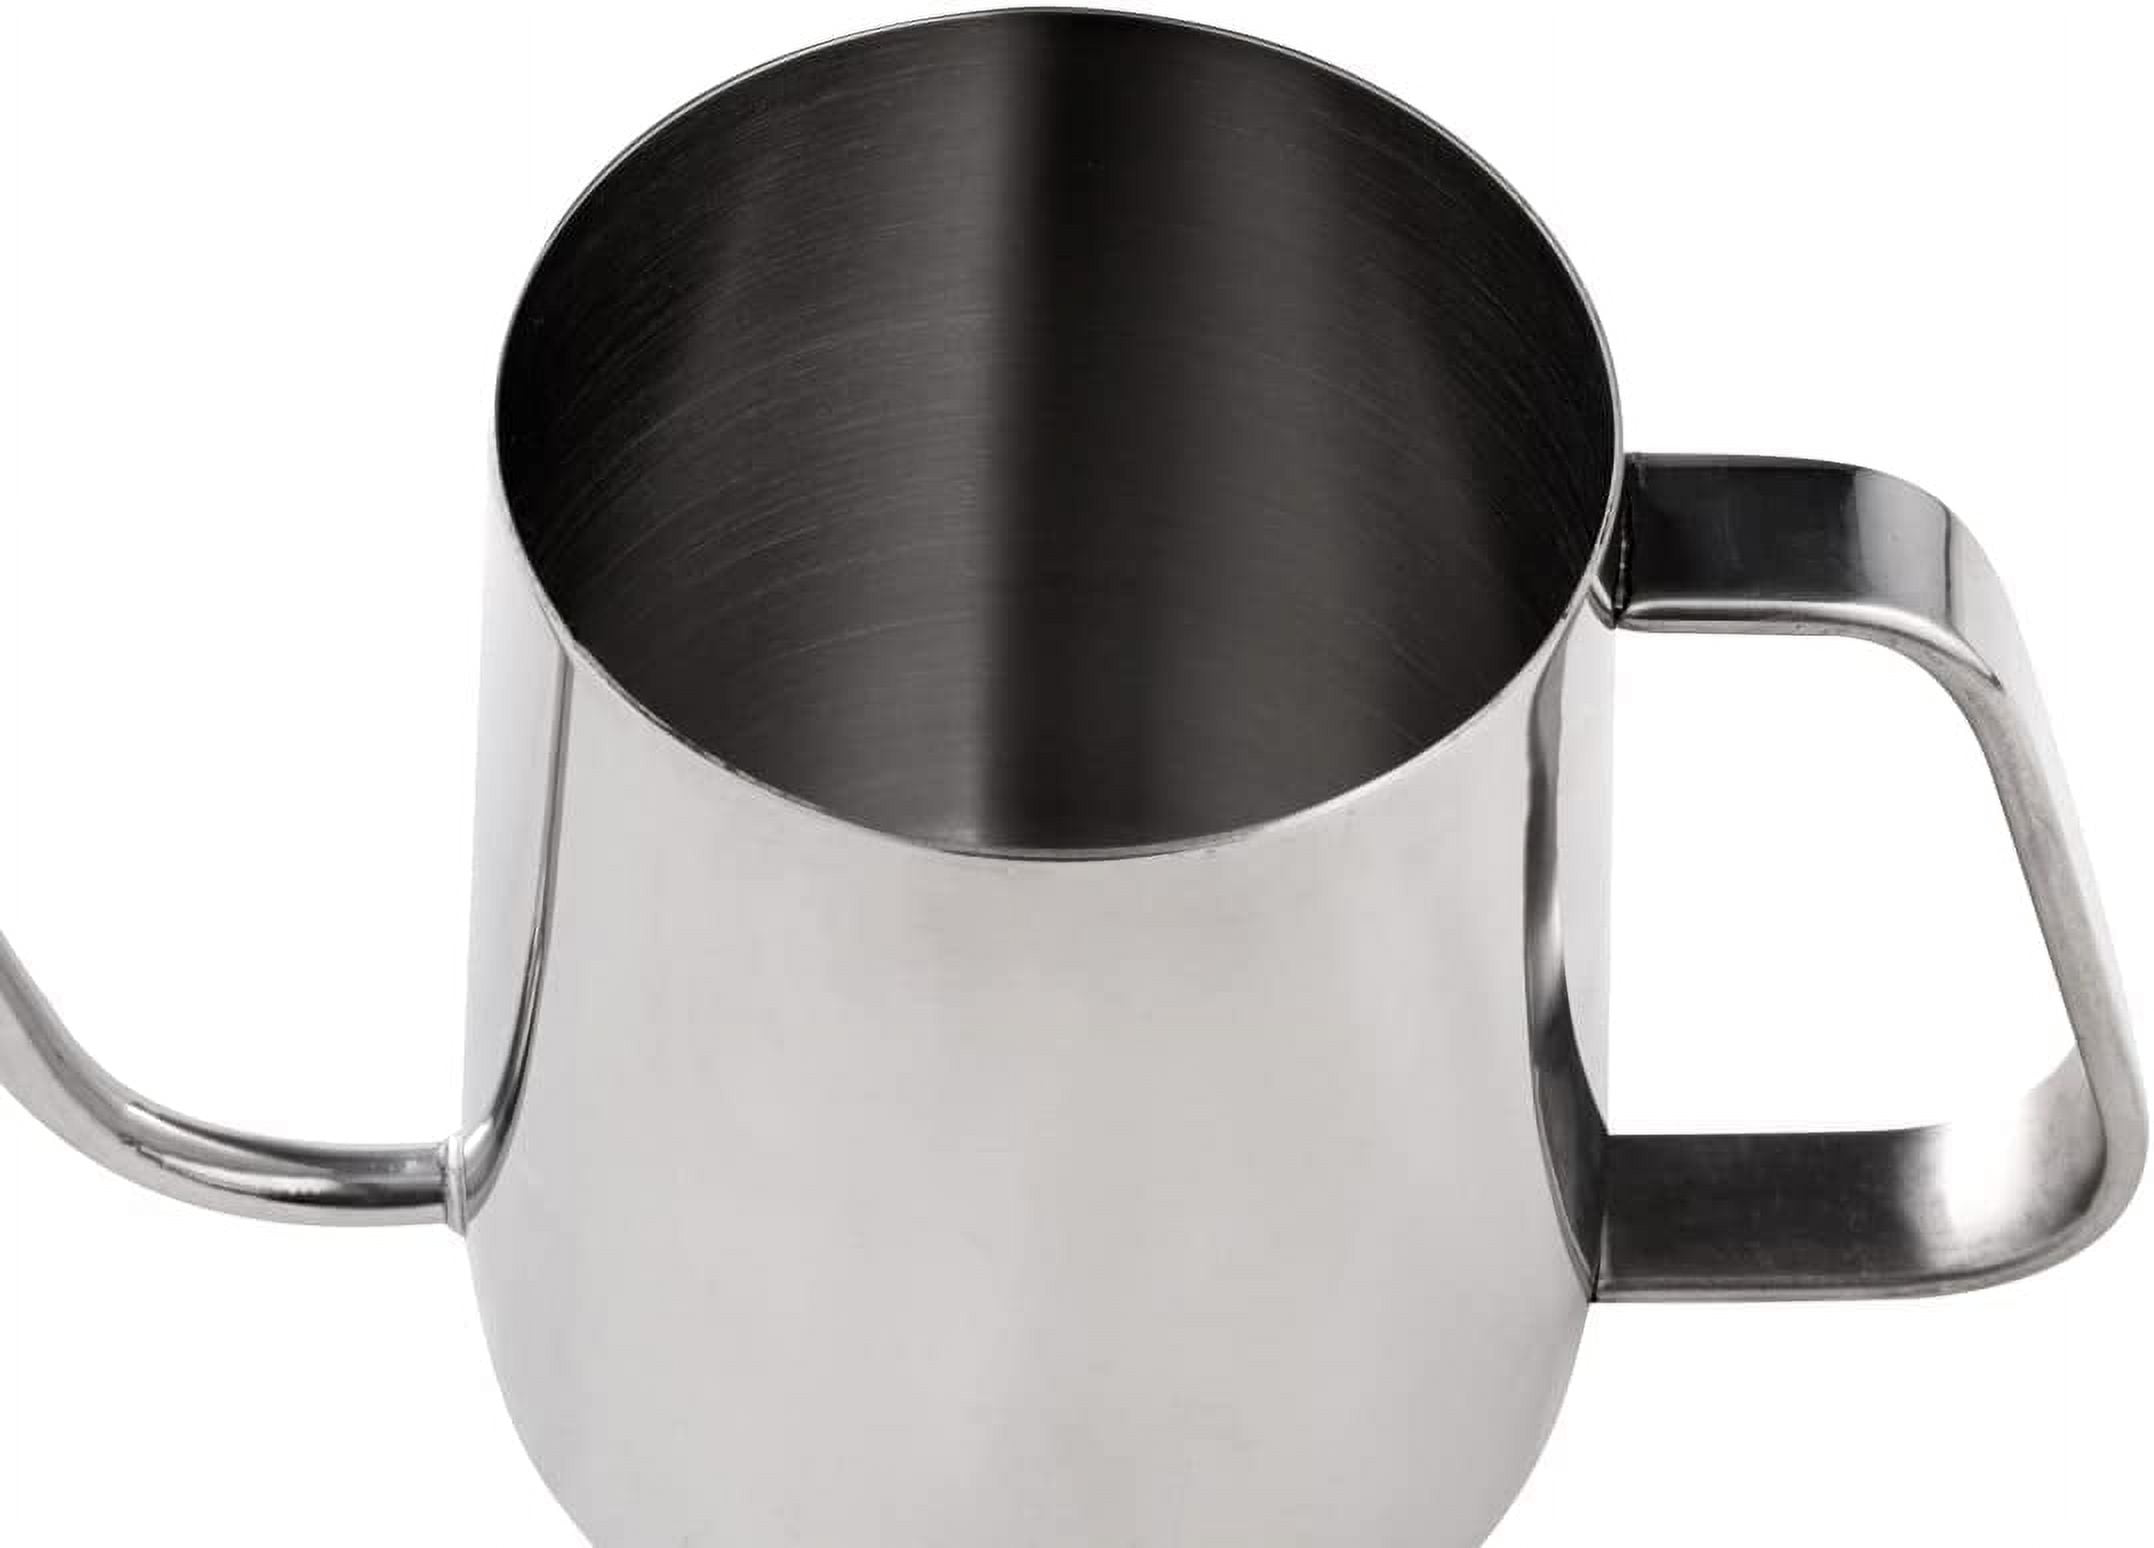 Restaurantware Restpresso 20 Ounce Gooseneck Kettle, 1 Dishwashable Pour Over Kettle - with Thermometer Hole, Non-Stick Coating, Black Stainless